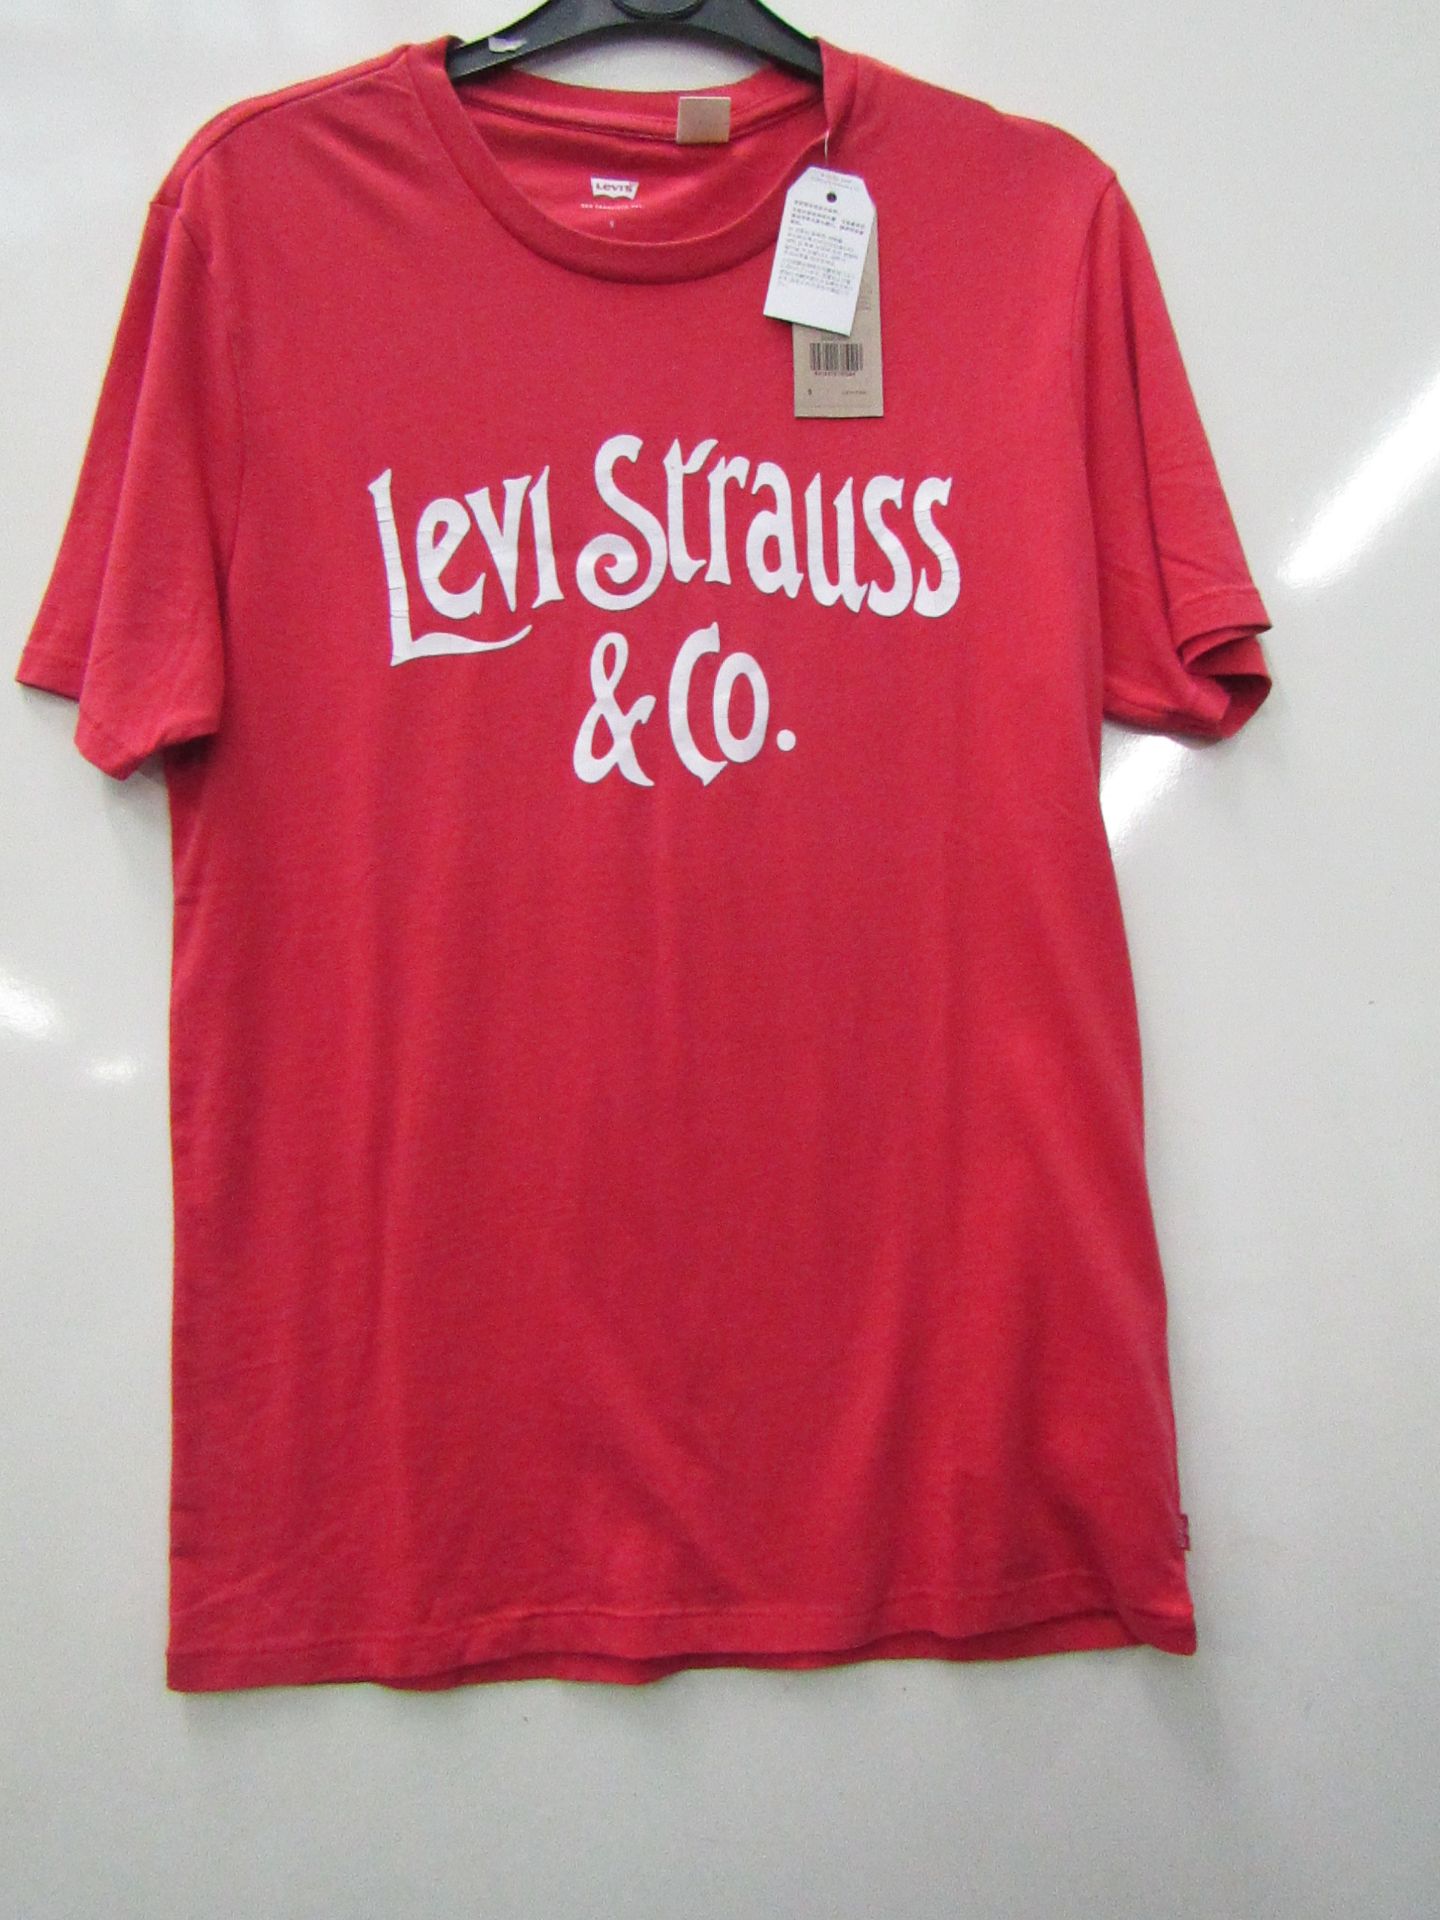 Mens Retro Levis Strauss T Shirt size S new with tags